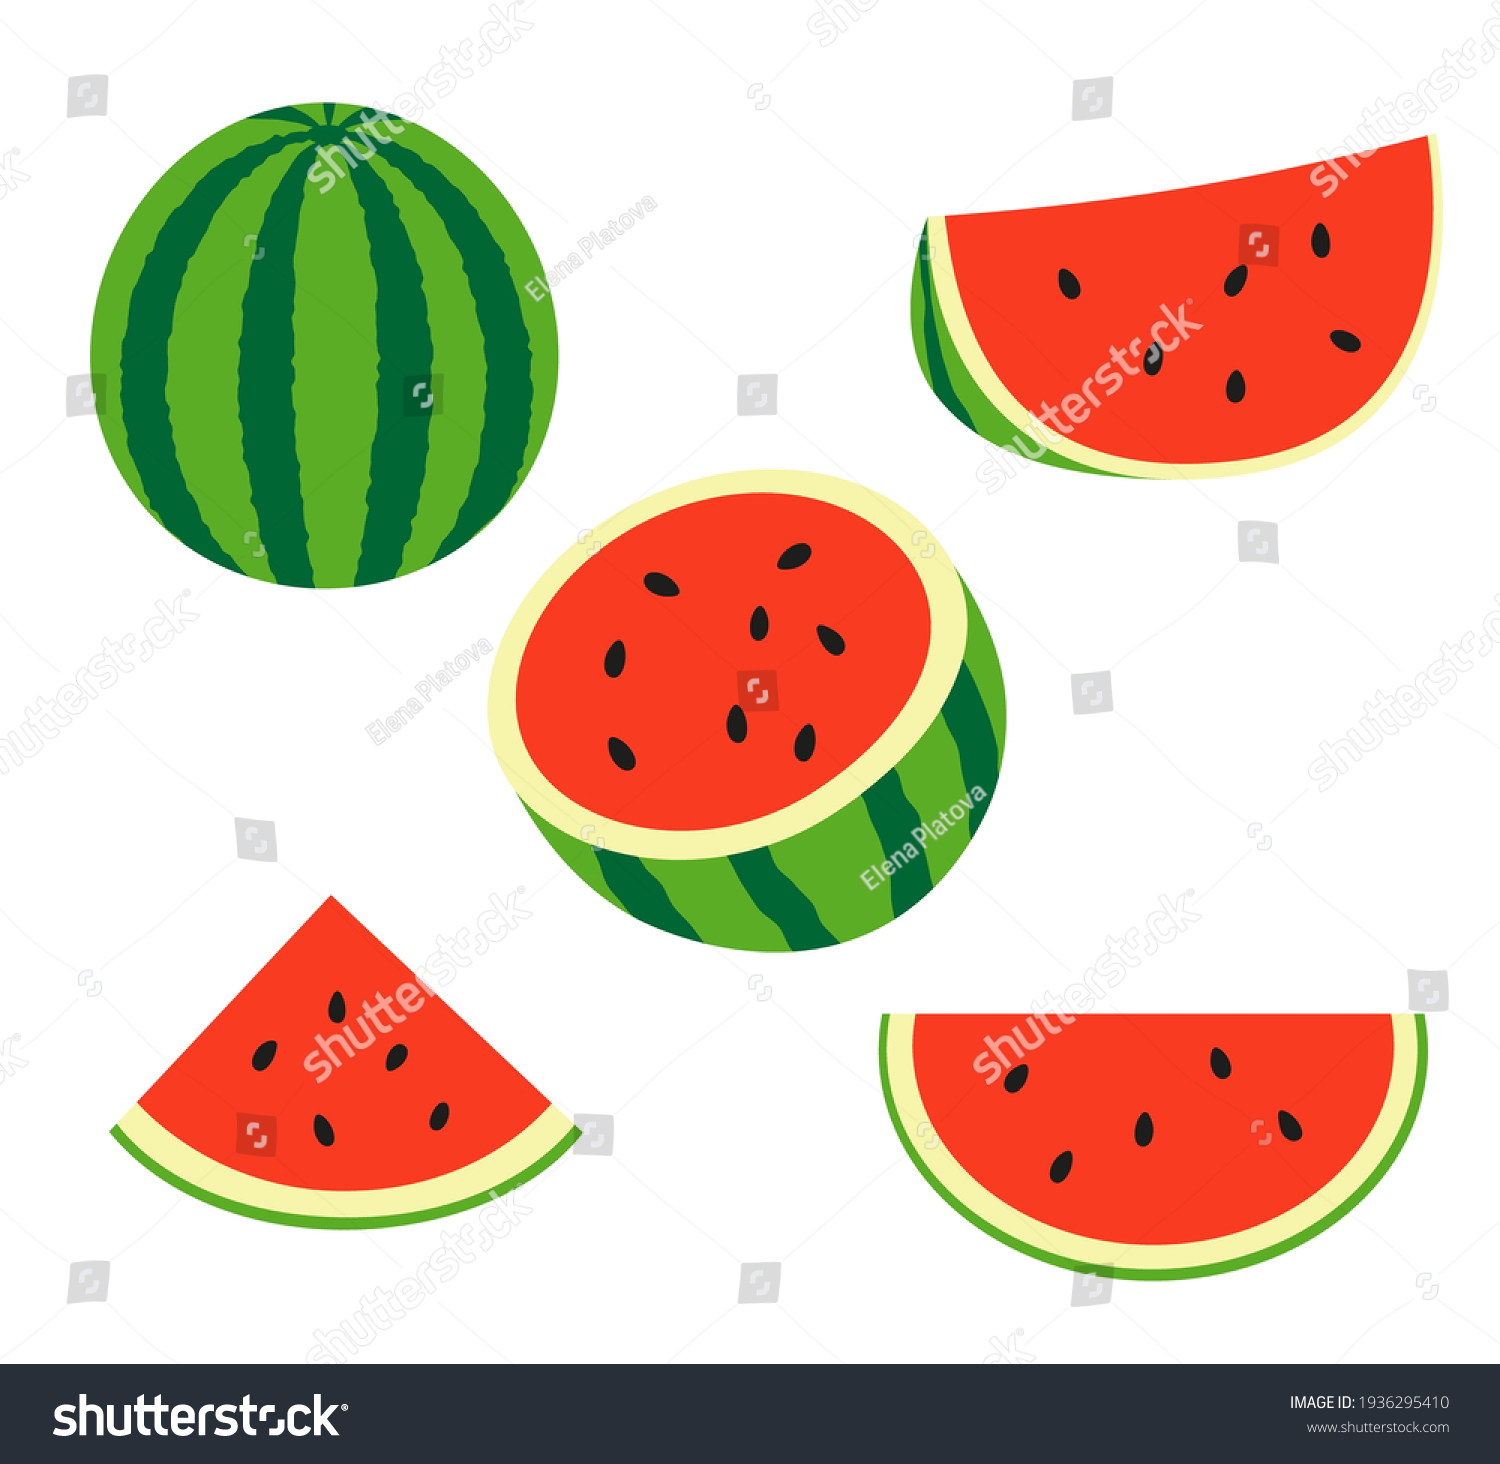 Fresh and juicy whole watermelons and slices. Set illustrations isolated on a white background. #1936295410